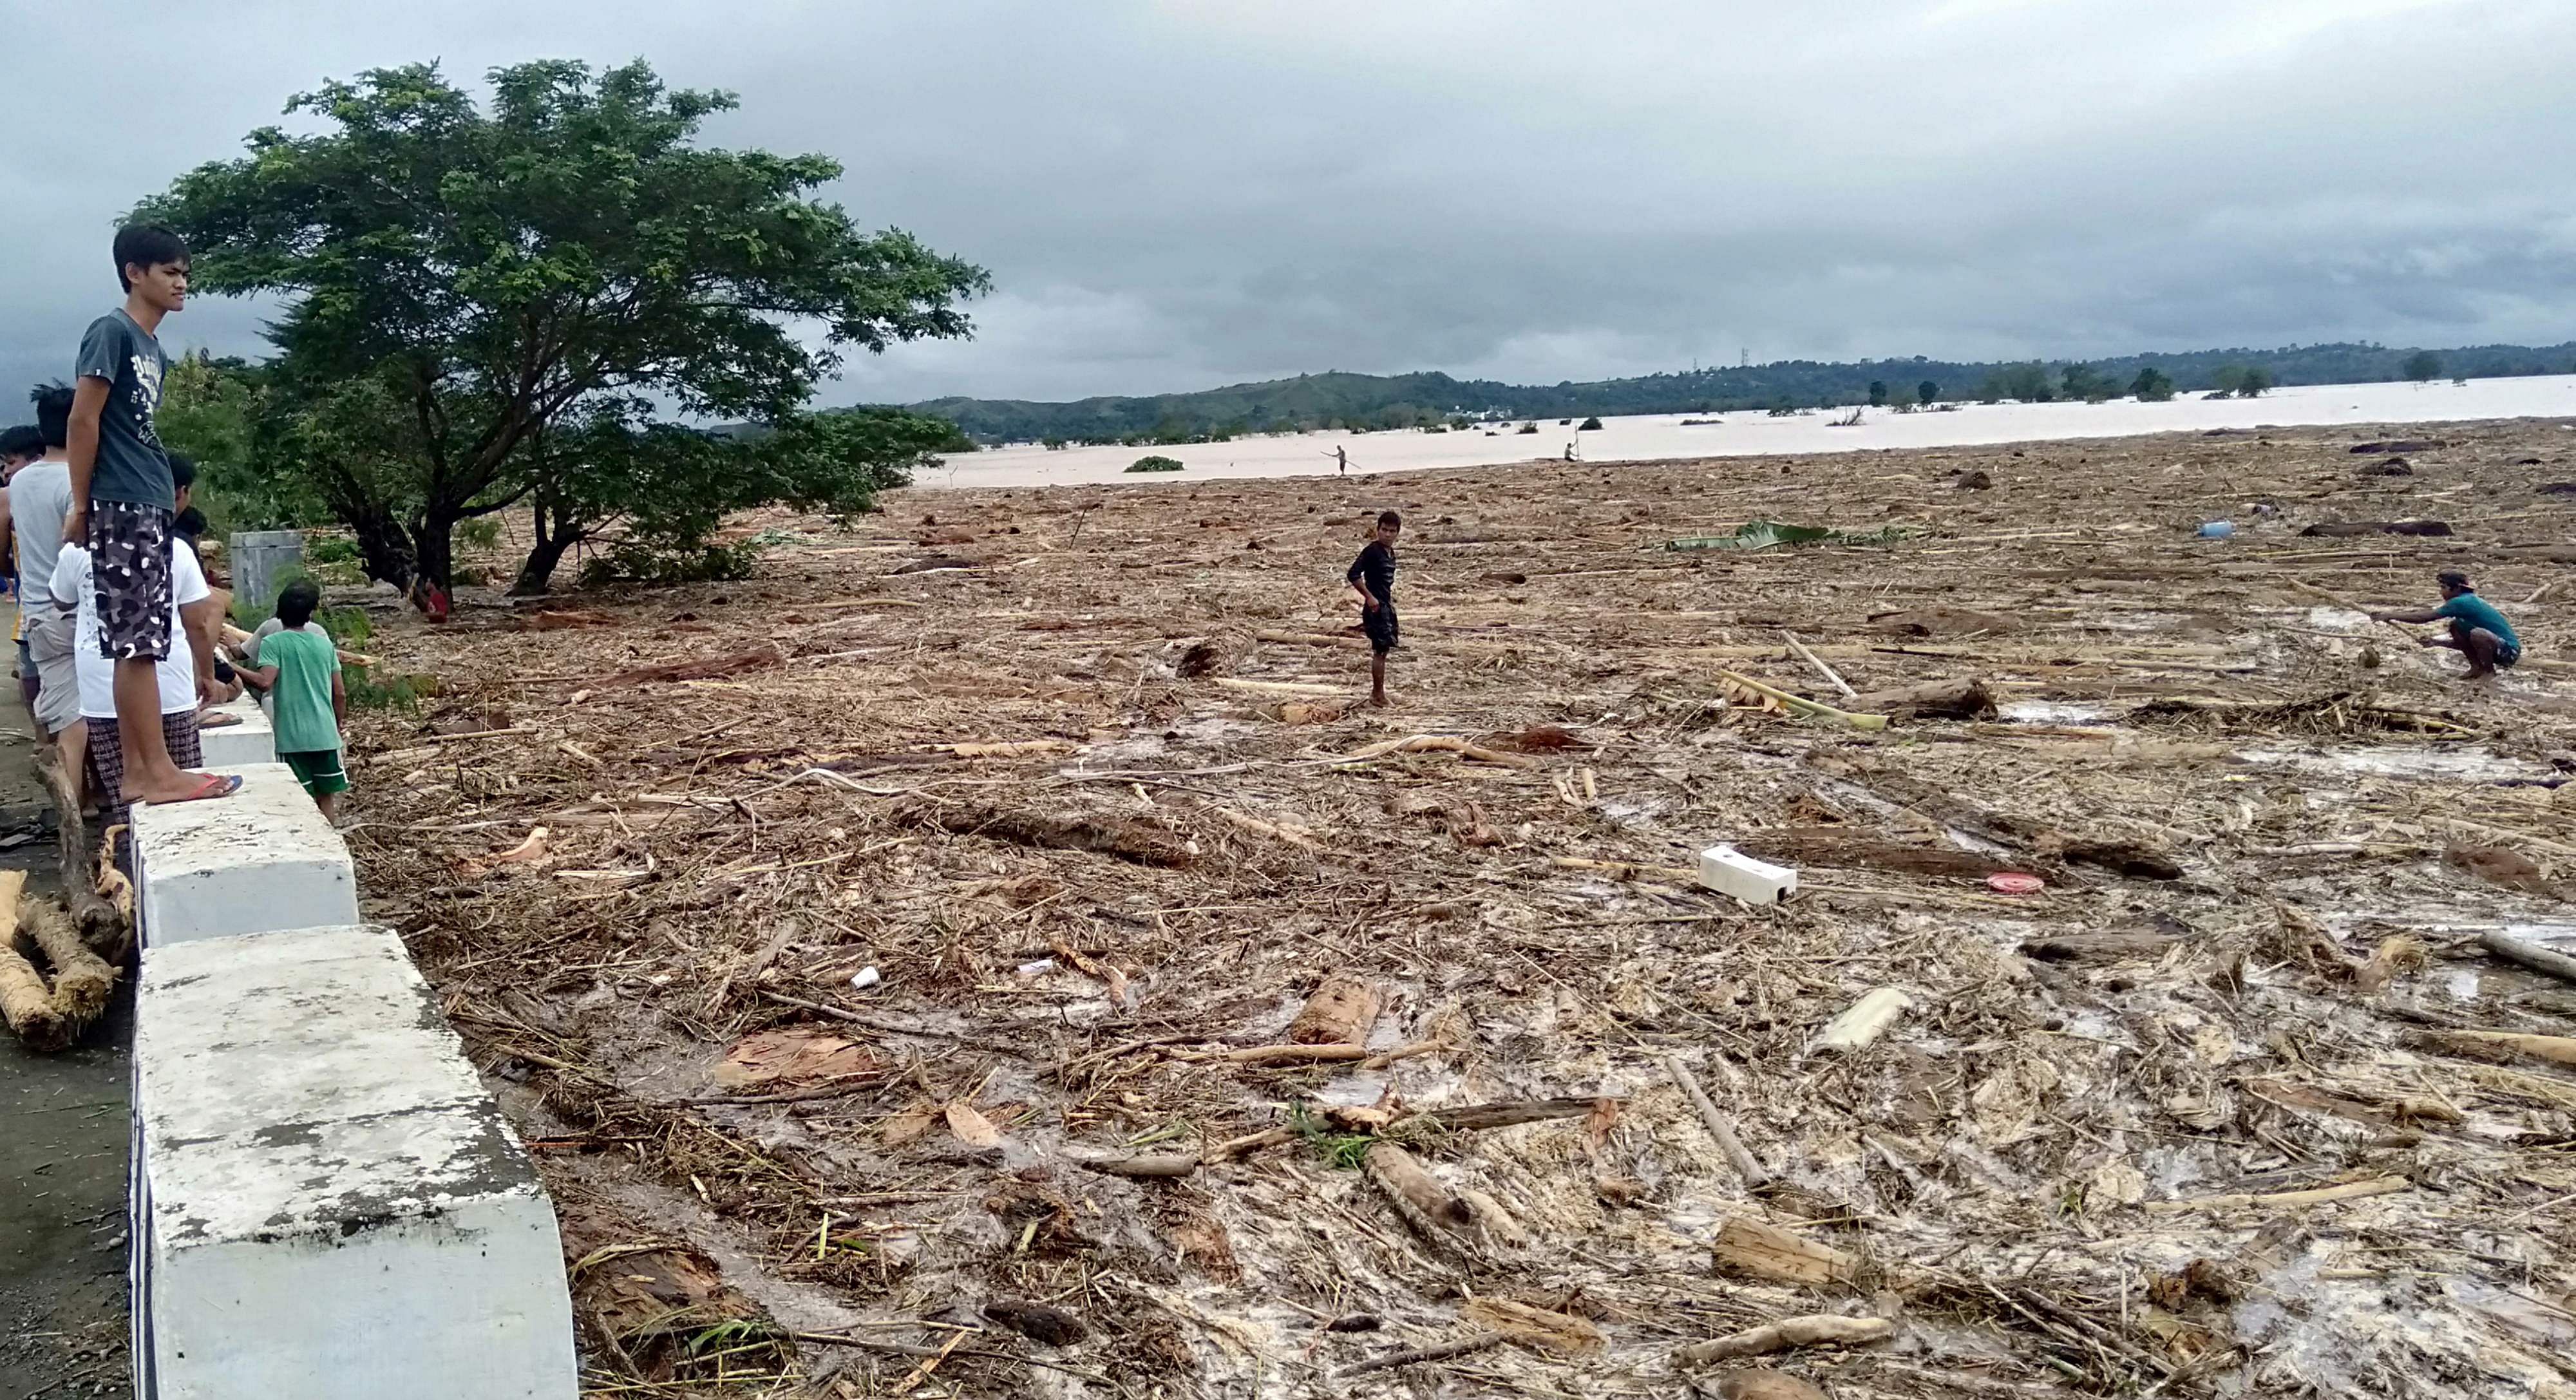 Residents walk on a rice field with washed up debris caused by Typhoon Kammuri in Ilagan. (AFP Photo)